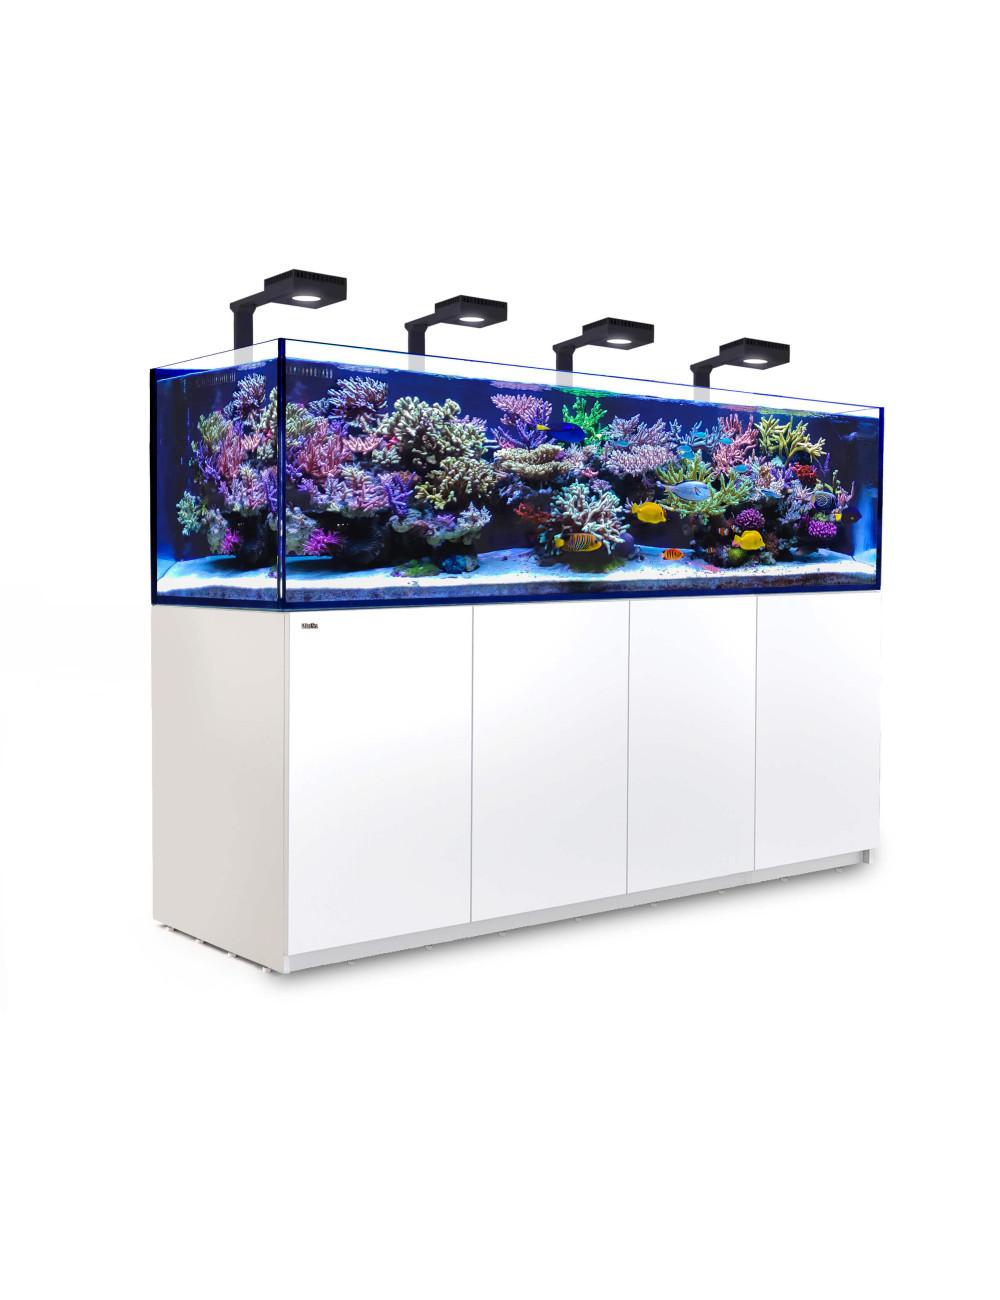 RED SEA - Reefer 900 G2 Deluxe - Blanc - 720 litres - 4 ReefLED 90 et 4 potences